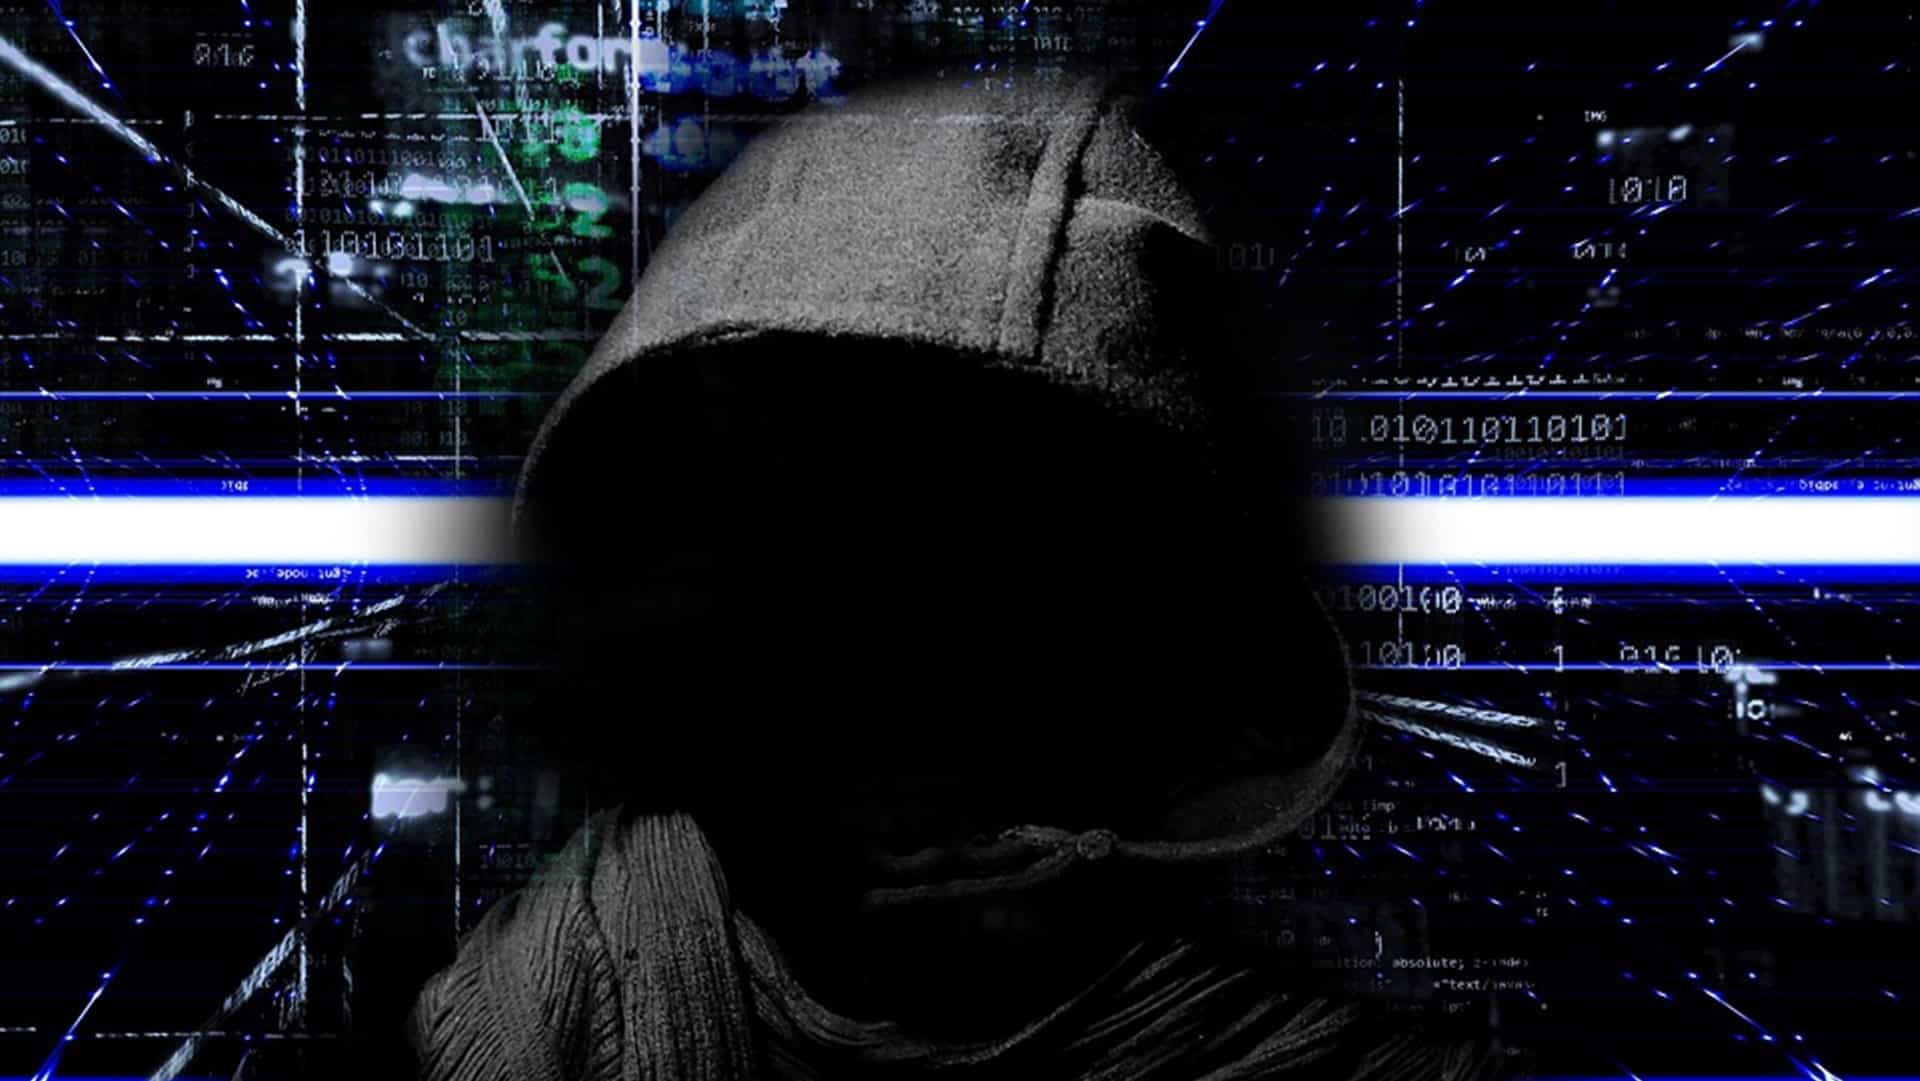 Over 300 phone of ministers, journos, activists, bizmen in India hacked: Report